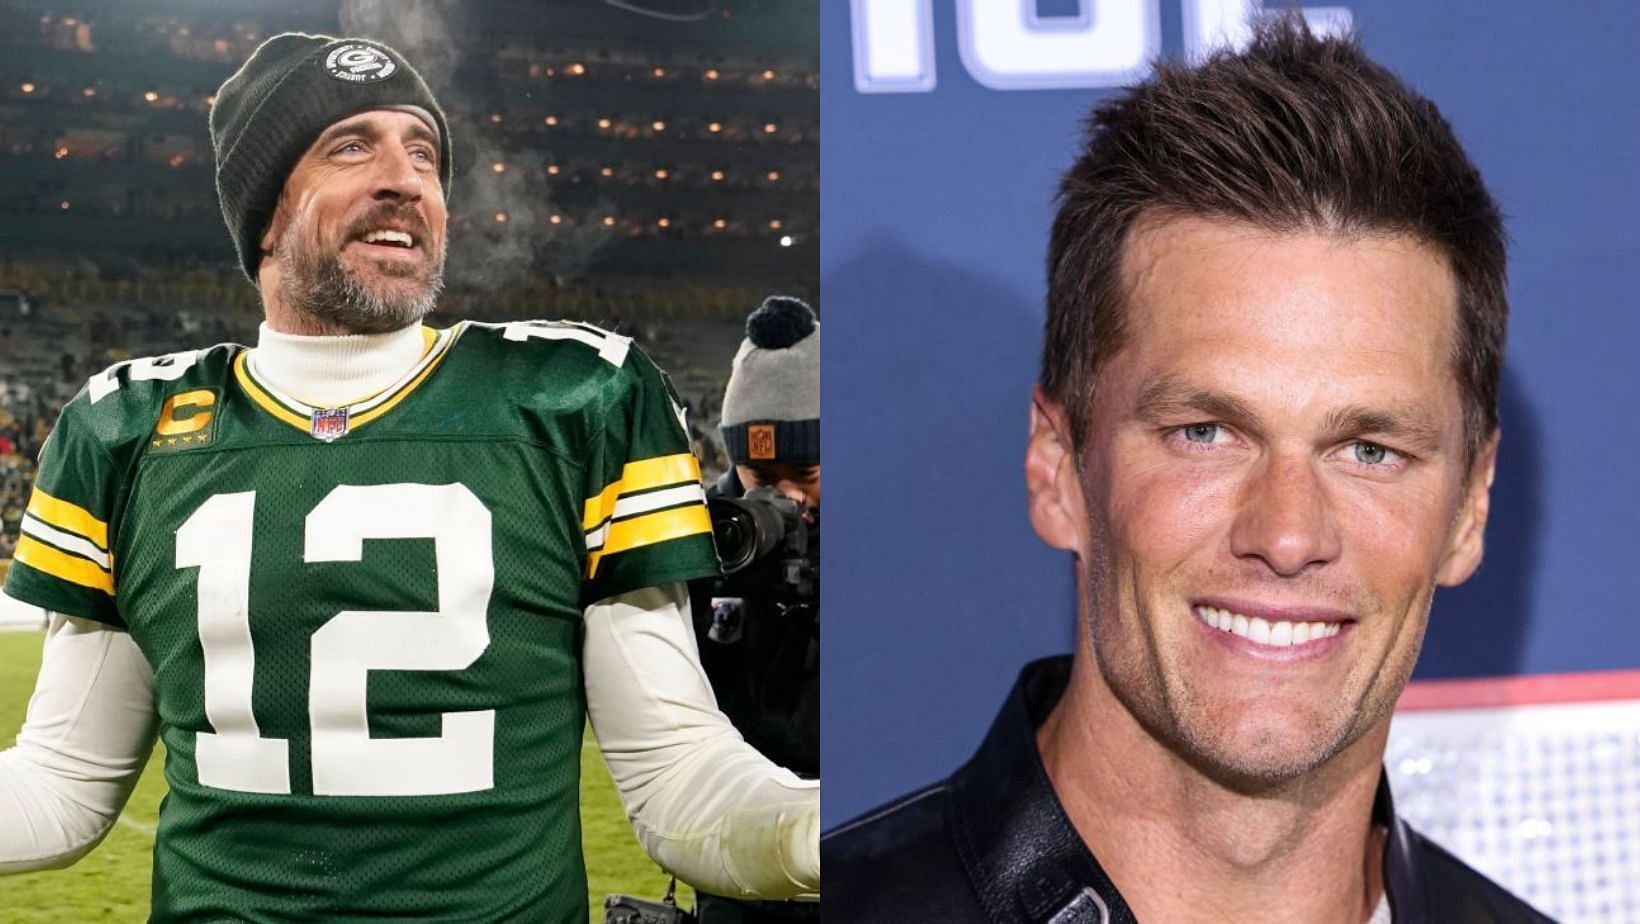 Rodgers now has more Top 100 appearances than Tom Brady